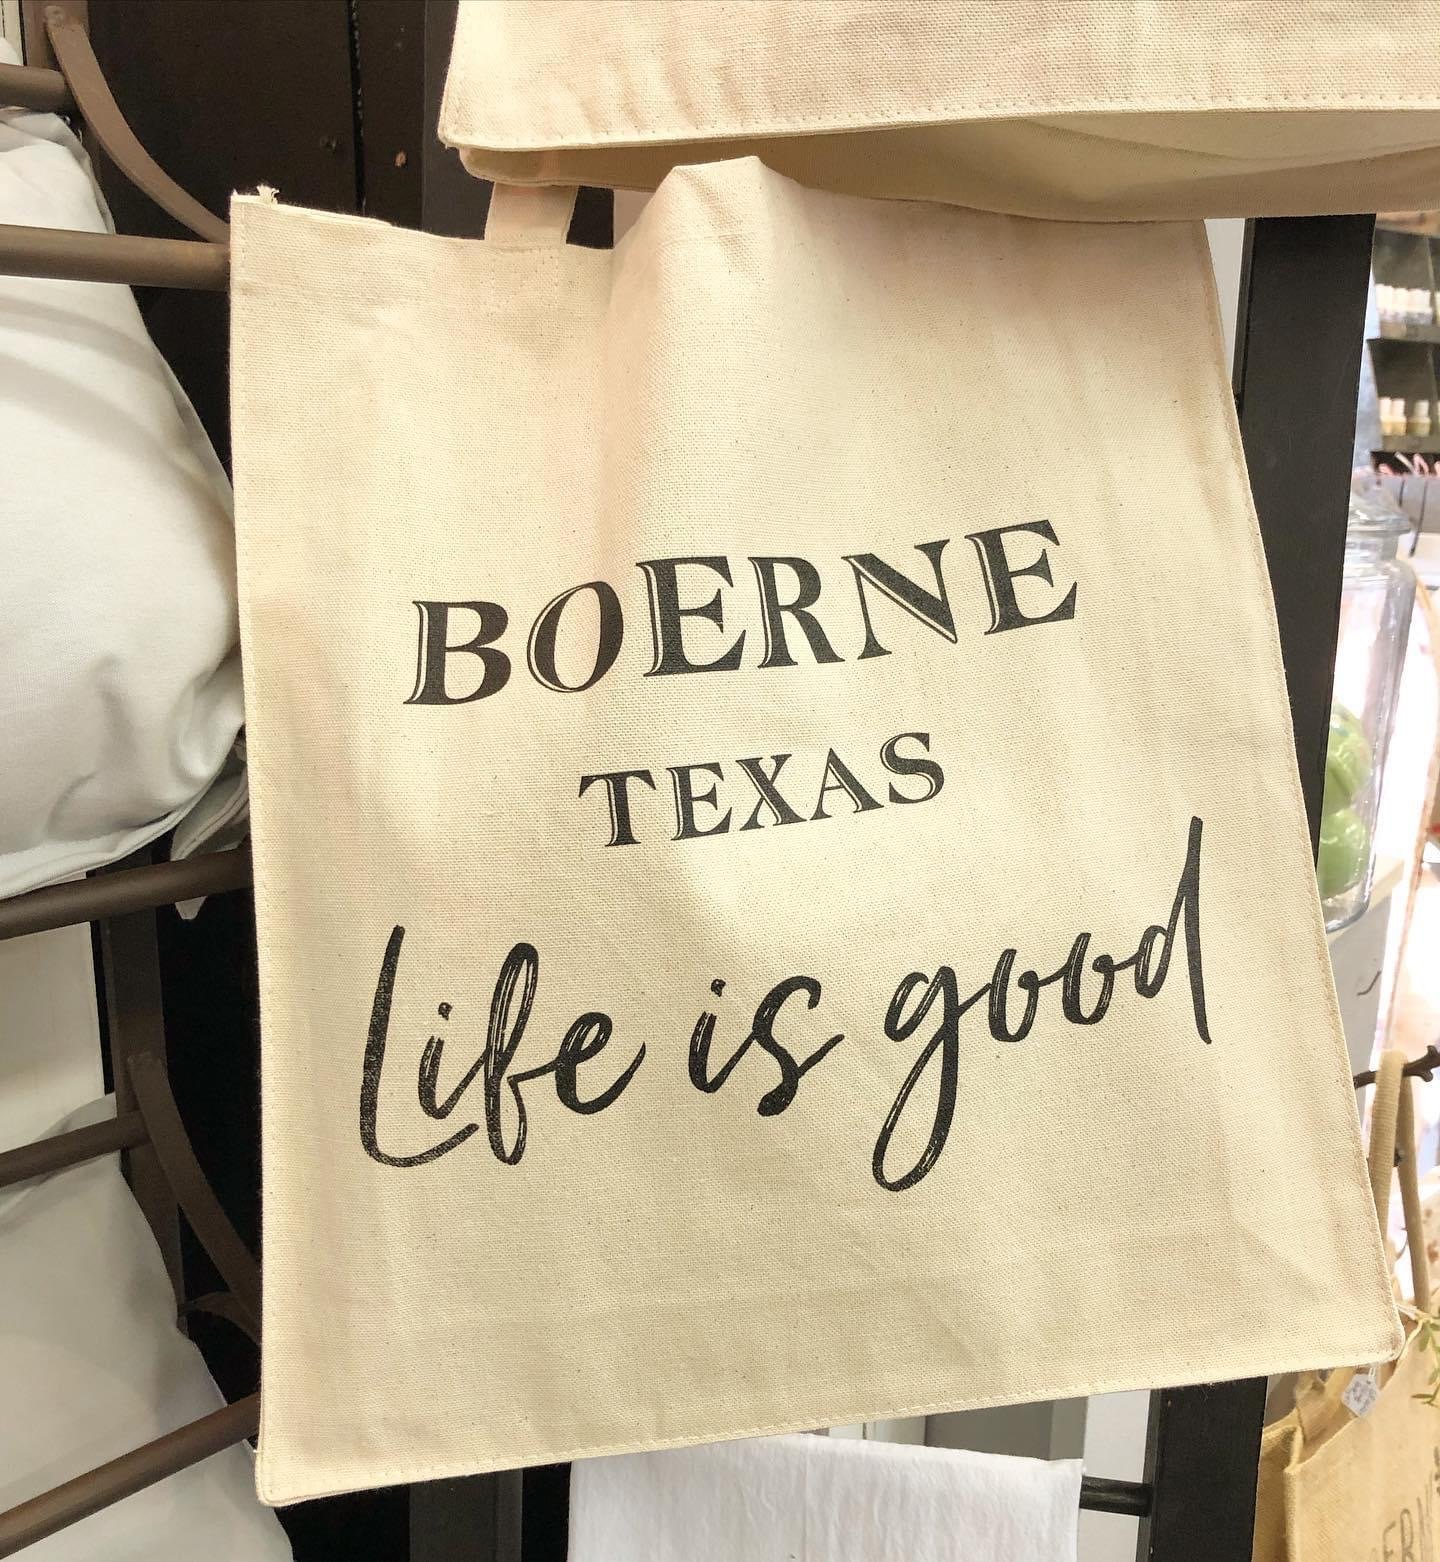 Boerne, Texas tote bags available at Corner Cartel | Boerne Main Street shopping